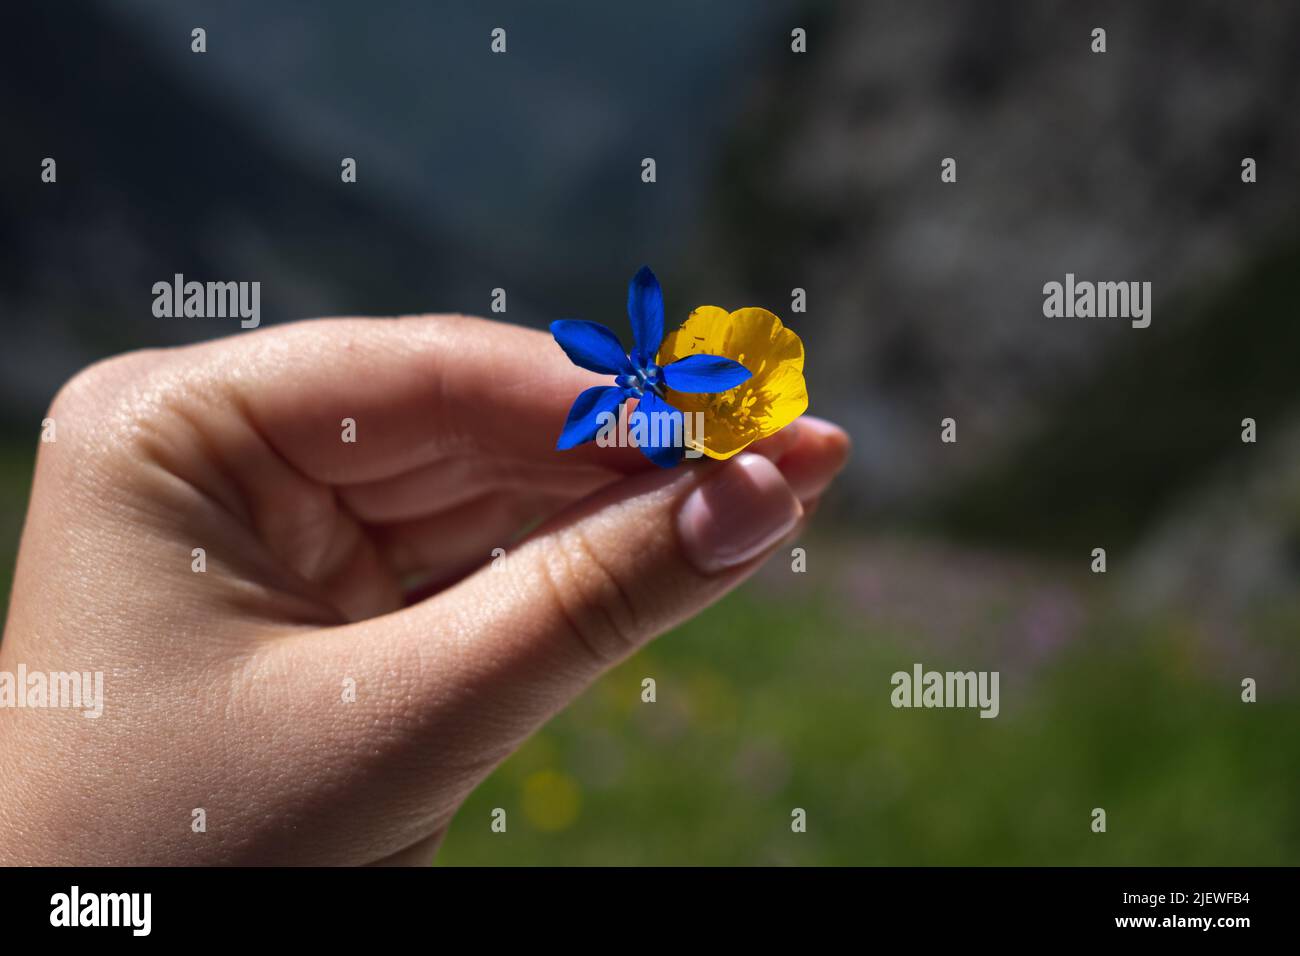 Yellow and blue flowers in the hand Stock Photo